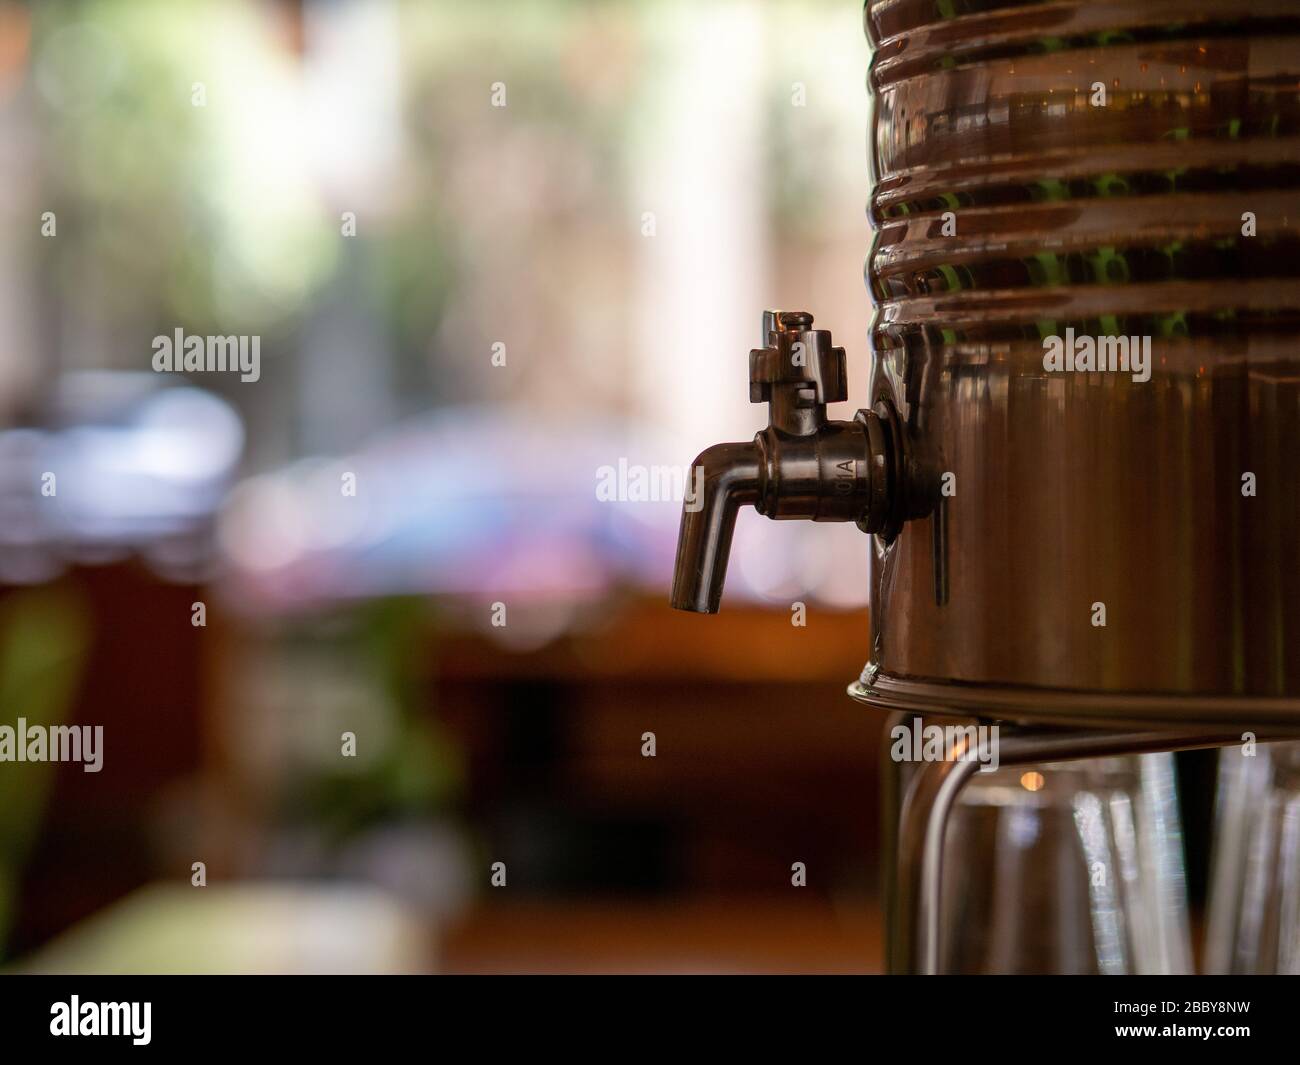 https://c8.alamy.com/comp/2BBY8NW/steel-water-cooler-with-manual-faucet-for-dispensing-drinking-water-2BBY8NW.jpg